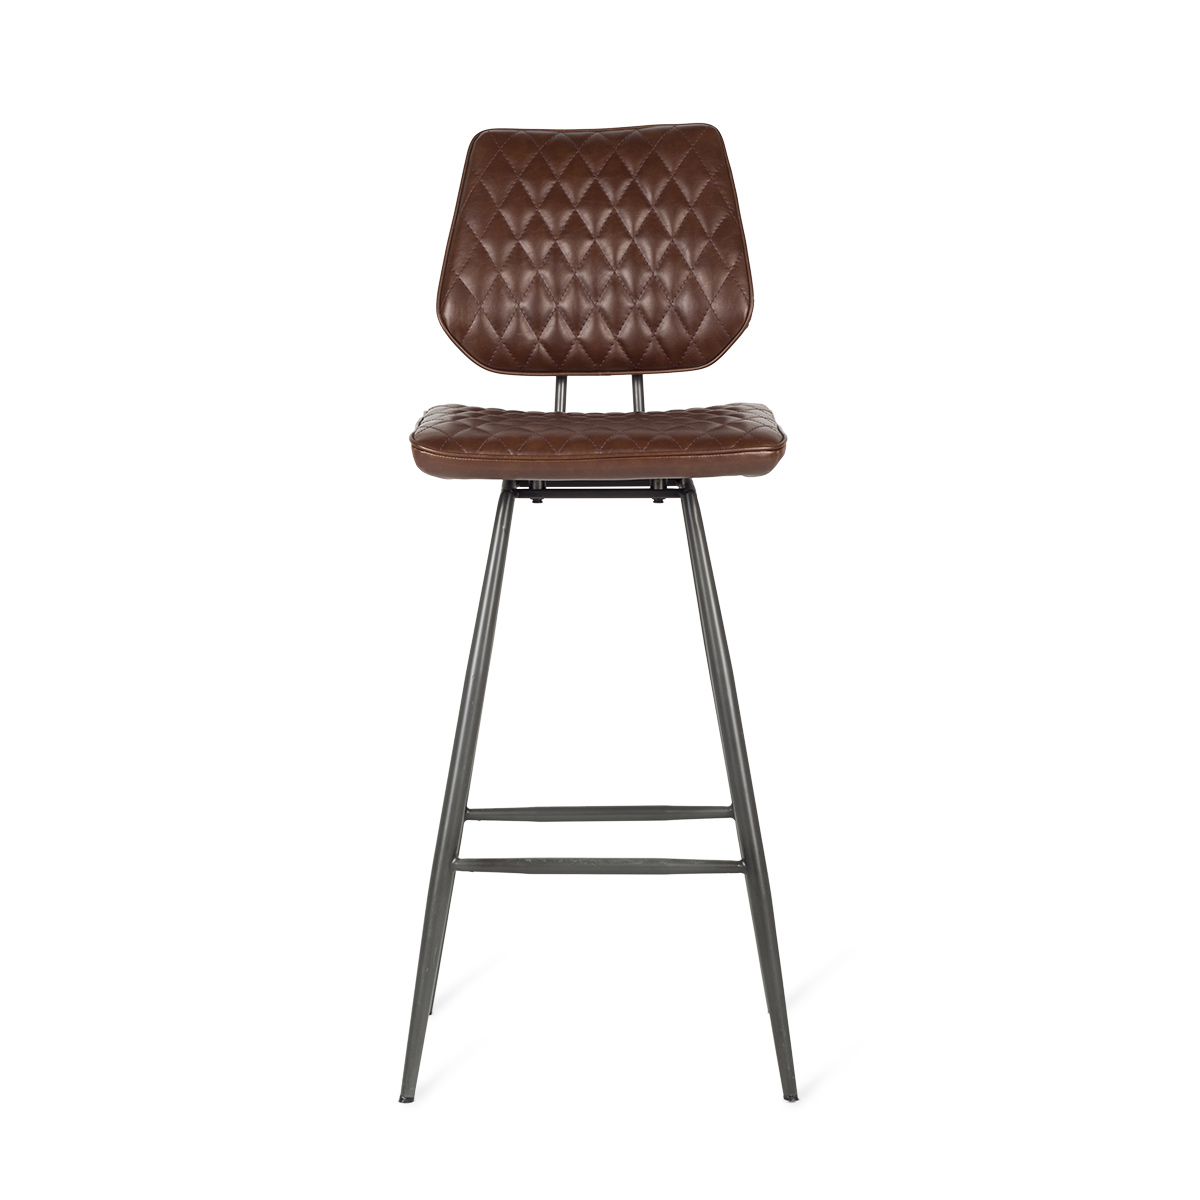 Retro Style Bar Stools Industrial, Vintage Bar Stools With Backs